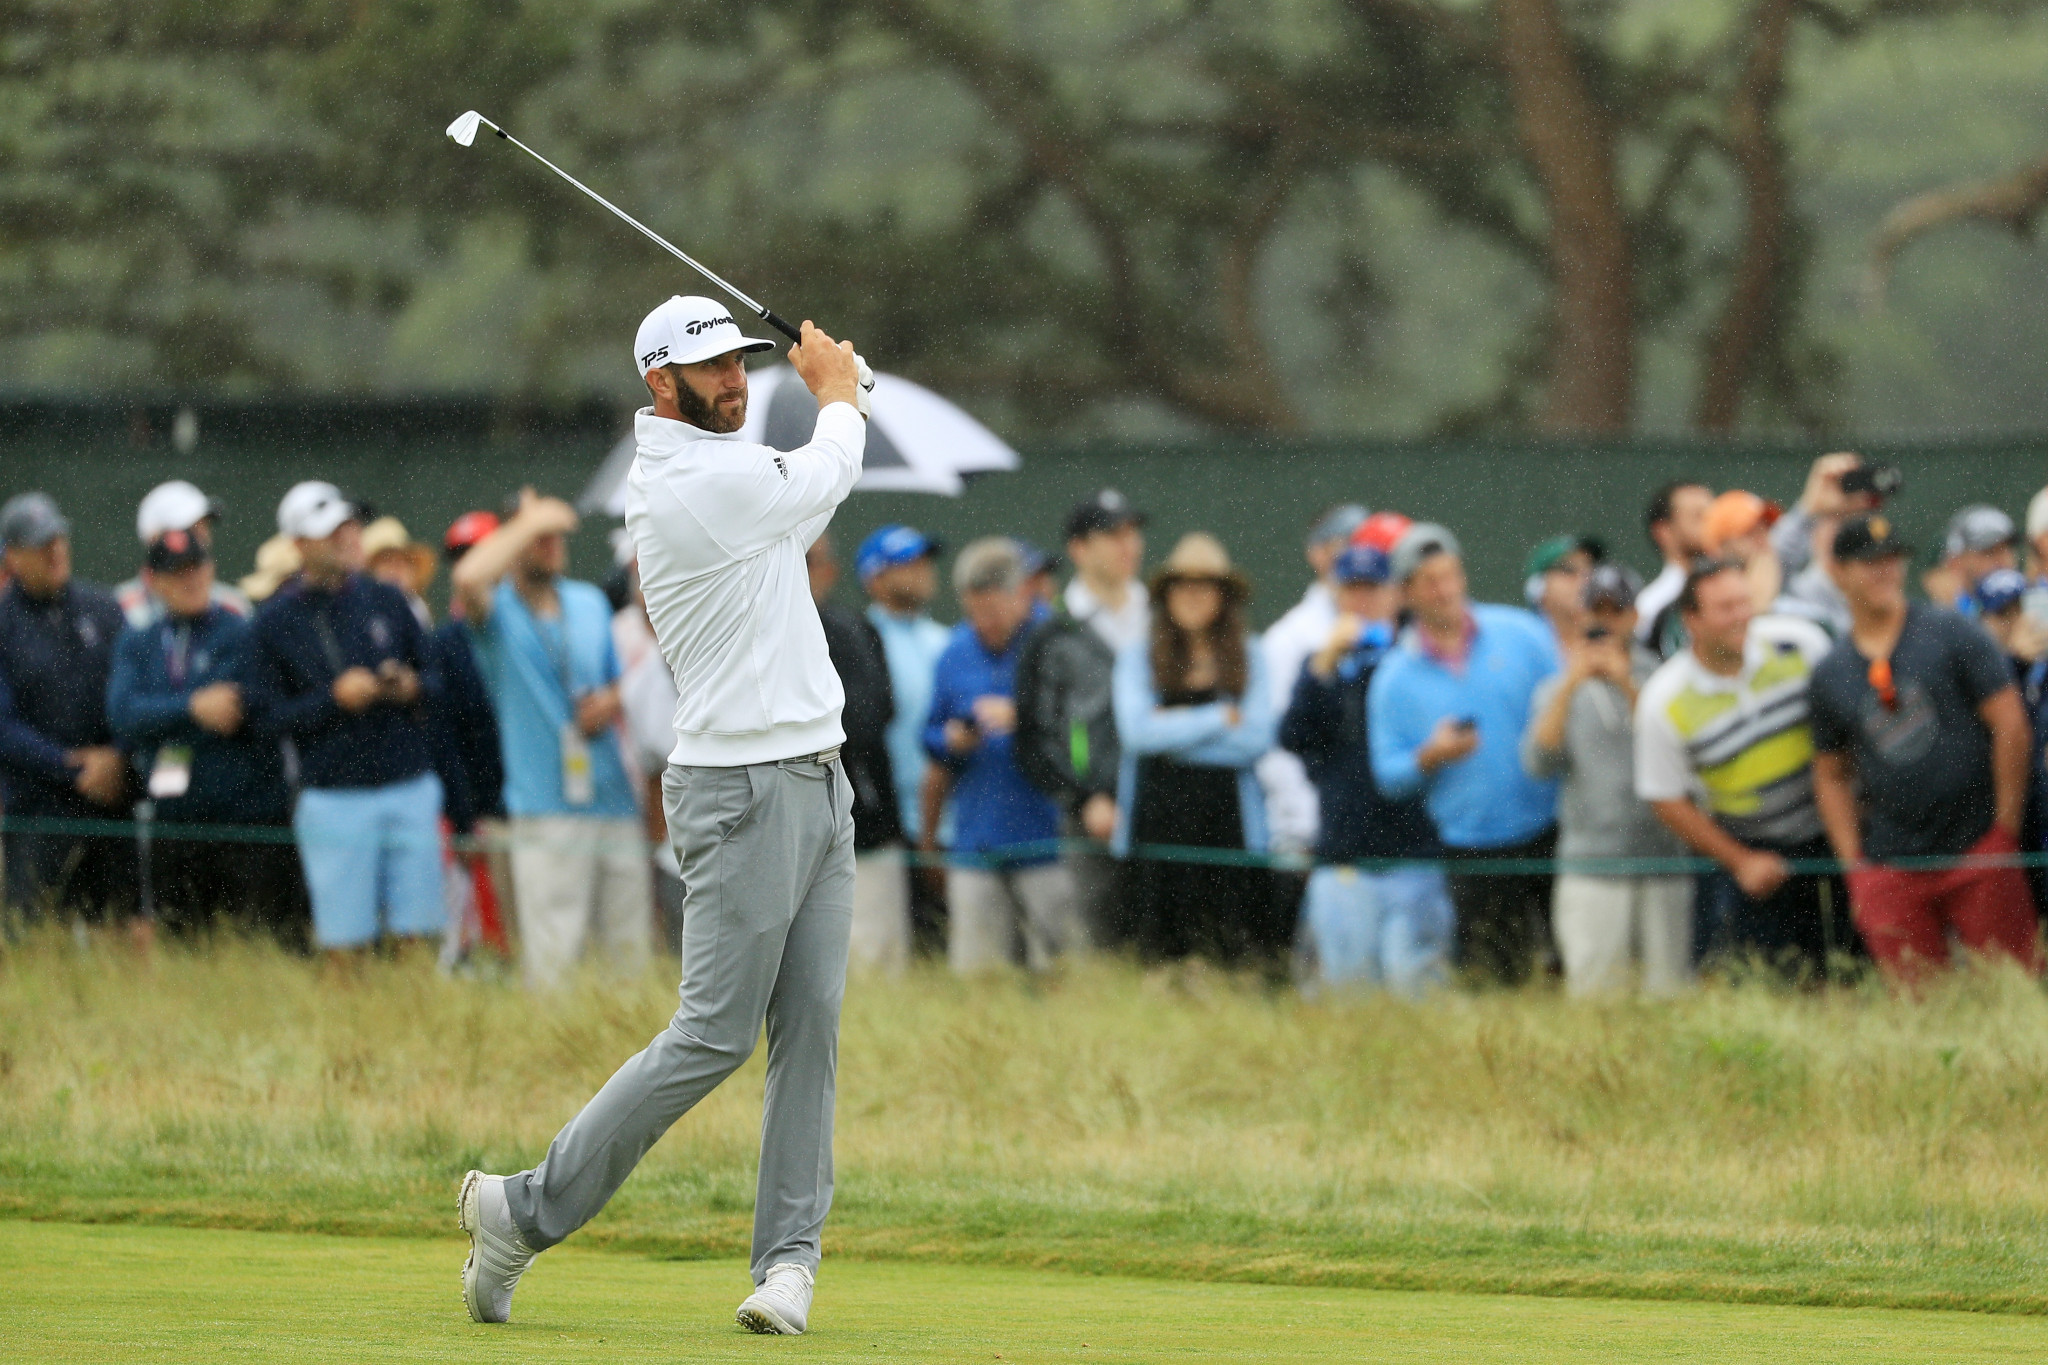 America's Dustin Johnson leads at the halfway mark of the US Open ©Getty Images